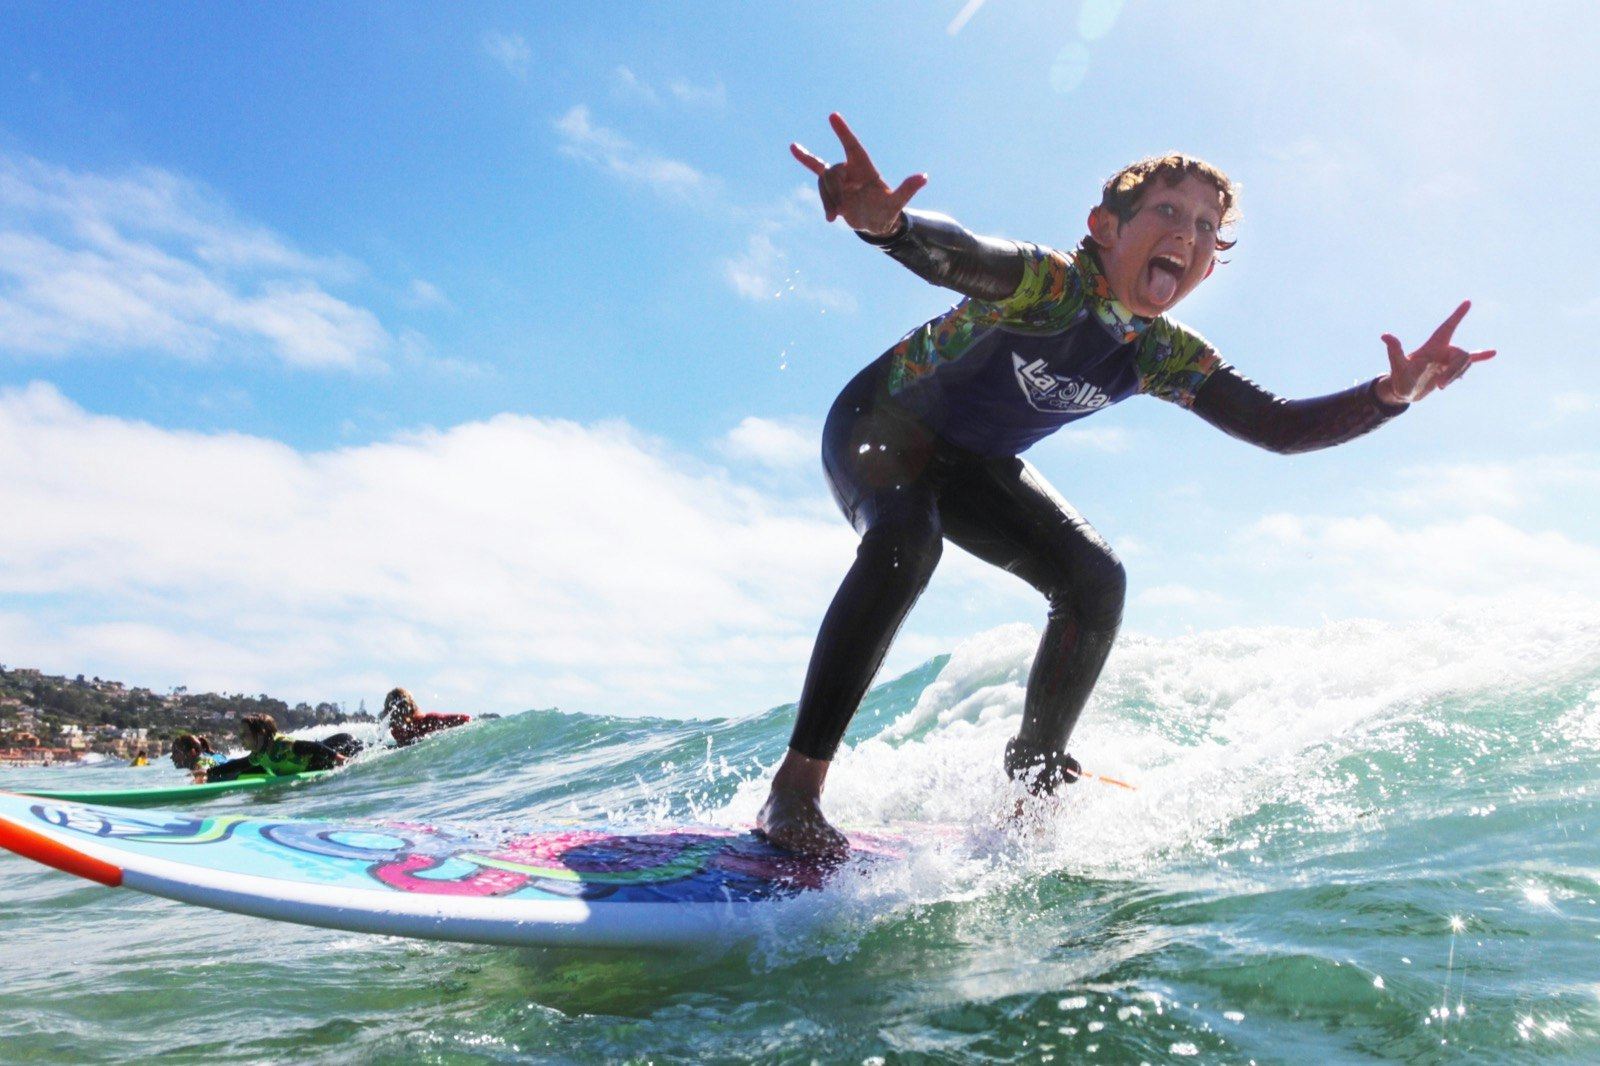 A young boy on a surf board in a wet suit flashes hand signs and makes a funny face while riding a wave